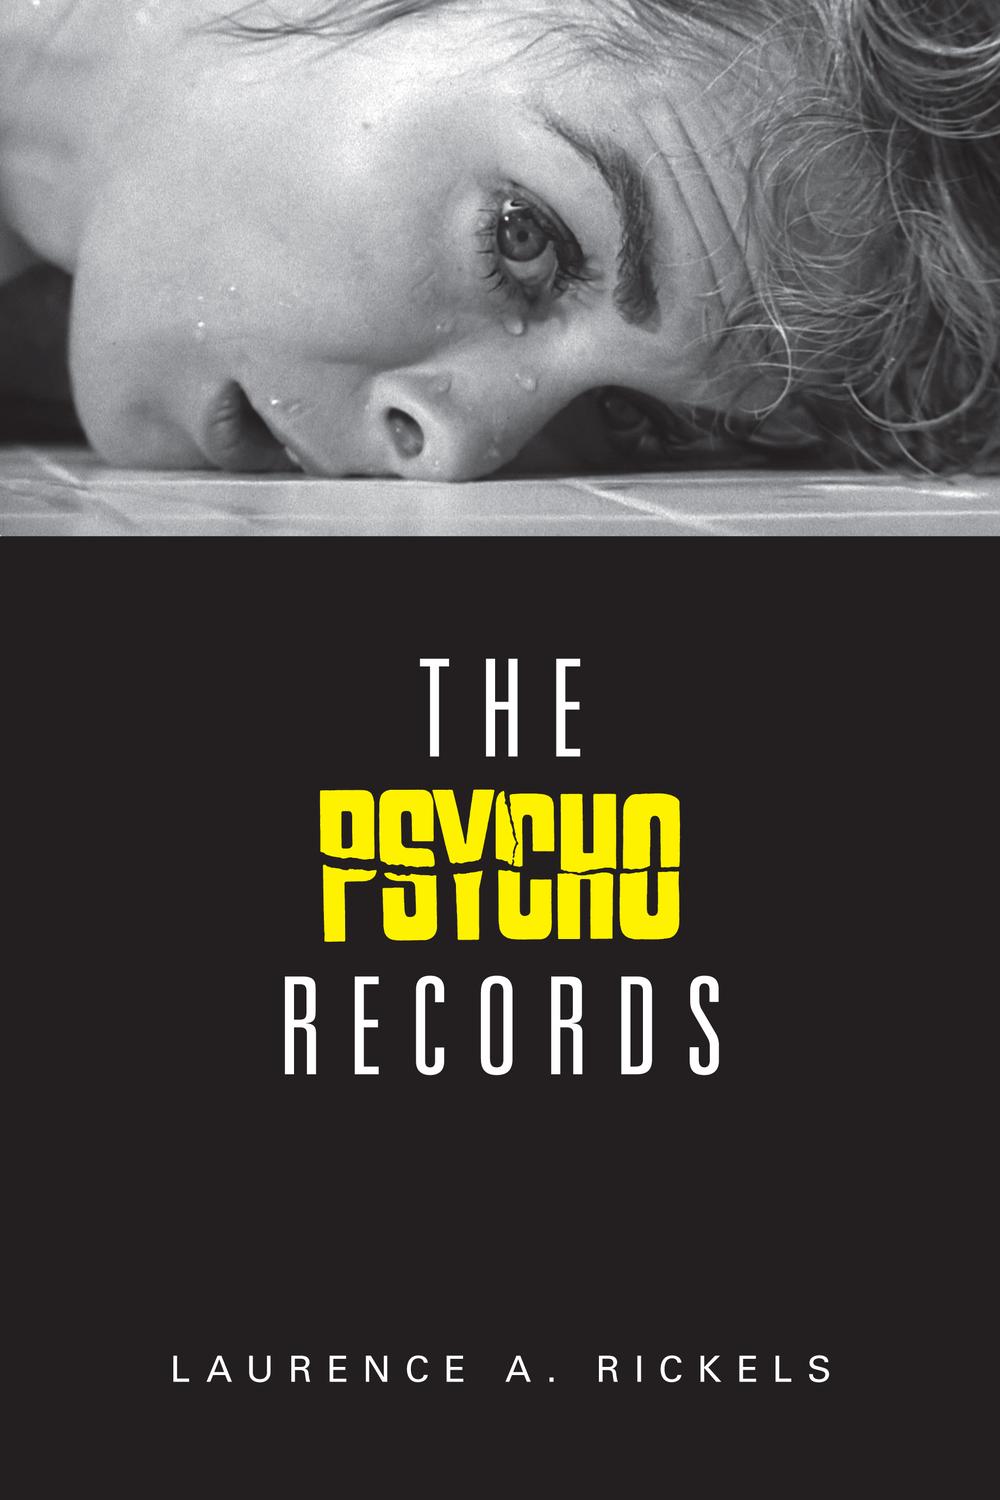 The Psycho Records - Laurence Rickels